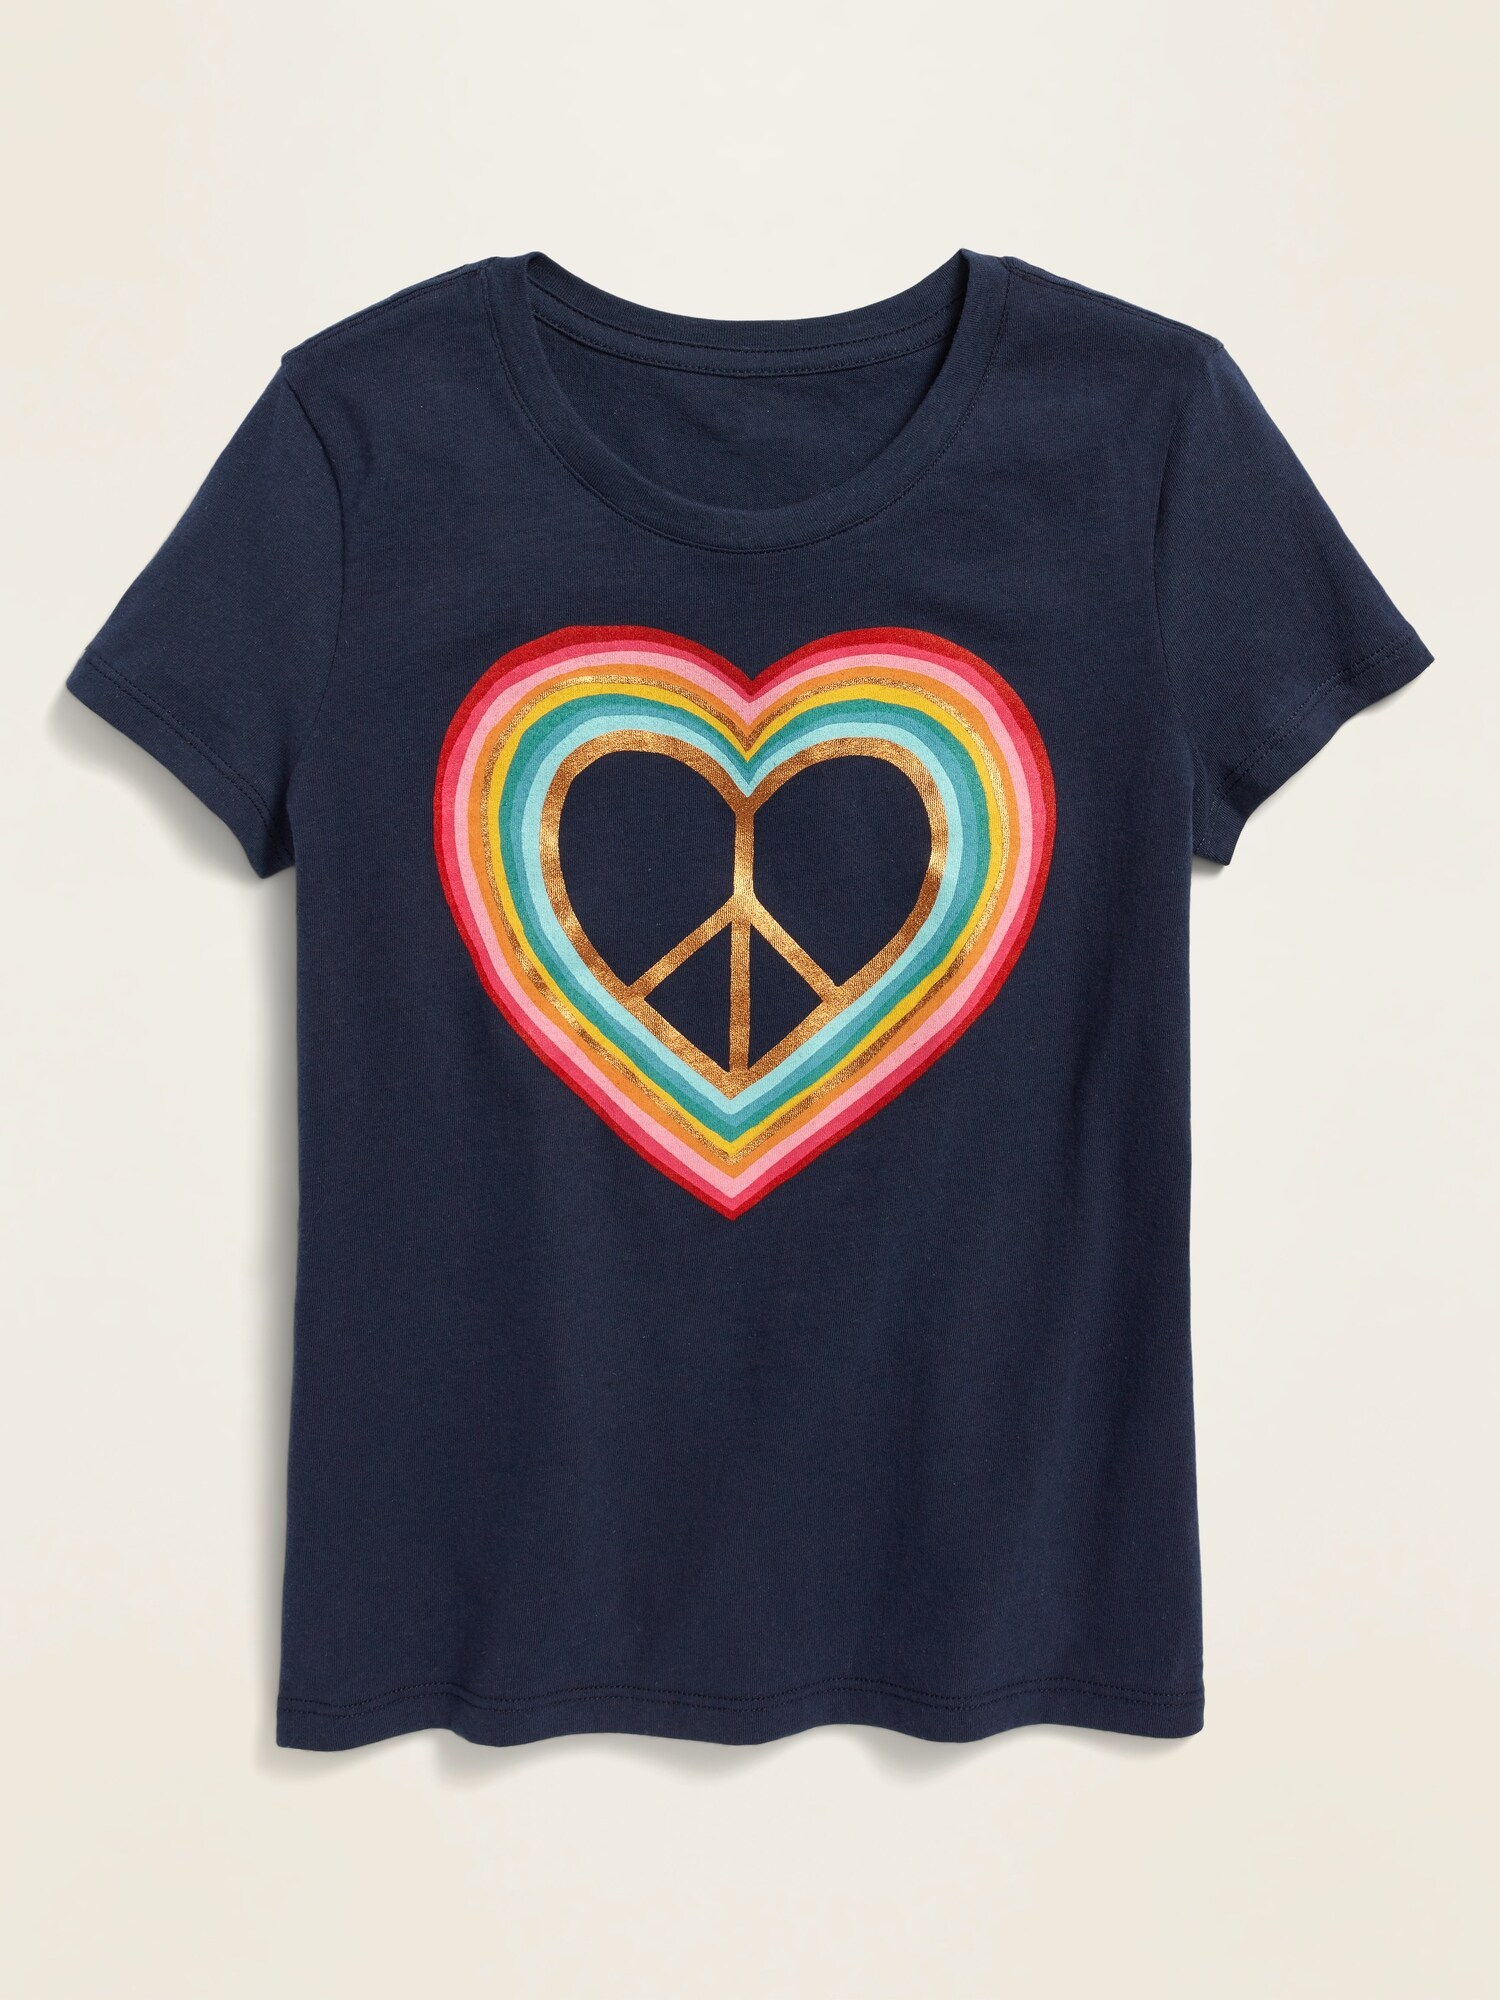 *Hot Deal* Short-Sleeve Graphic Tee for Girls